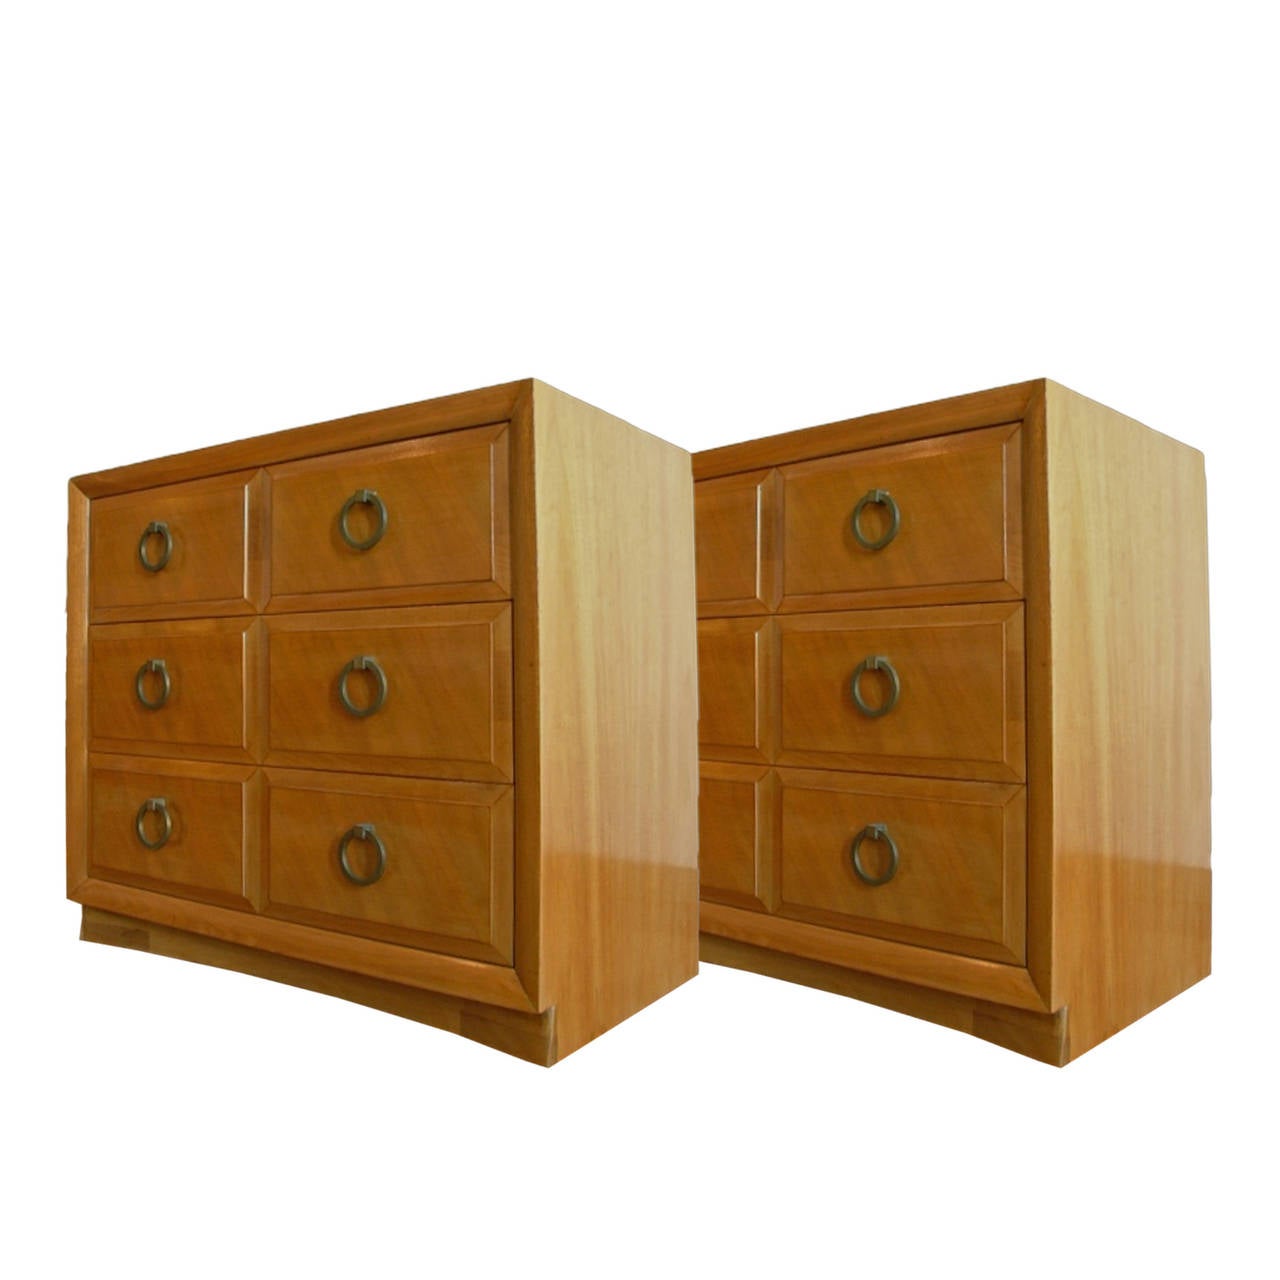 Handsome pair of three-drawer chests with heavy brass ring pulls. Lovely finish. All original. Stunning!